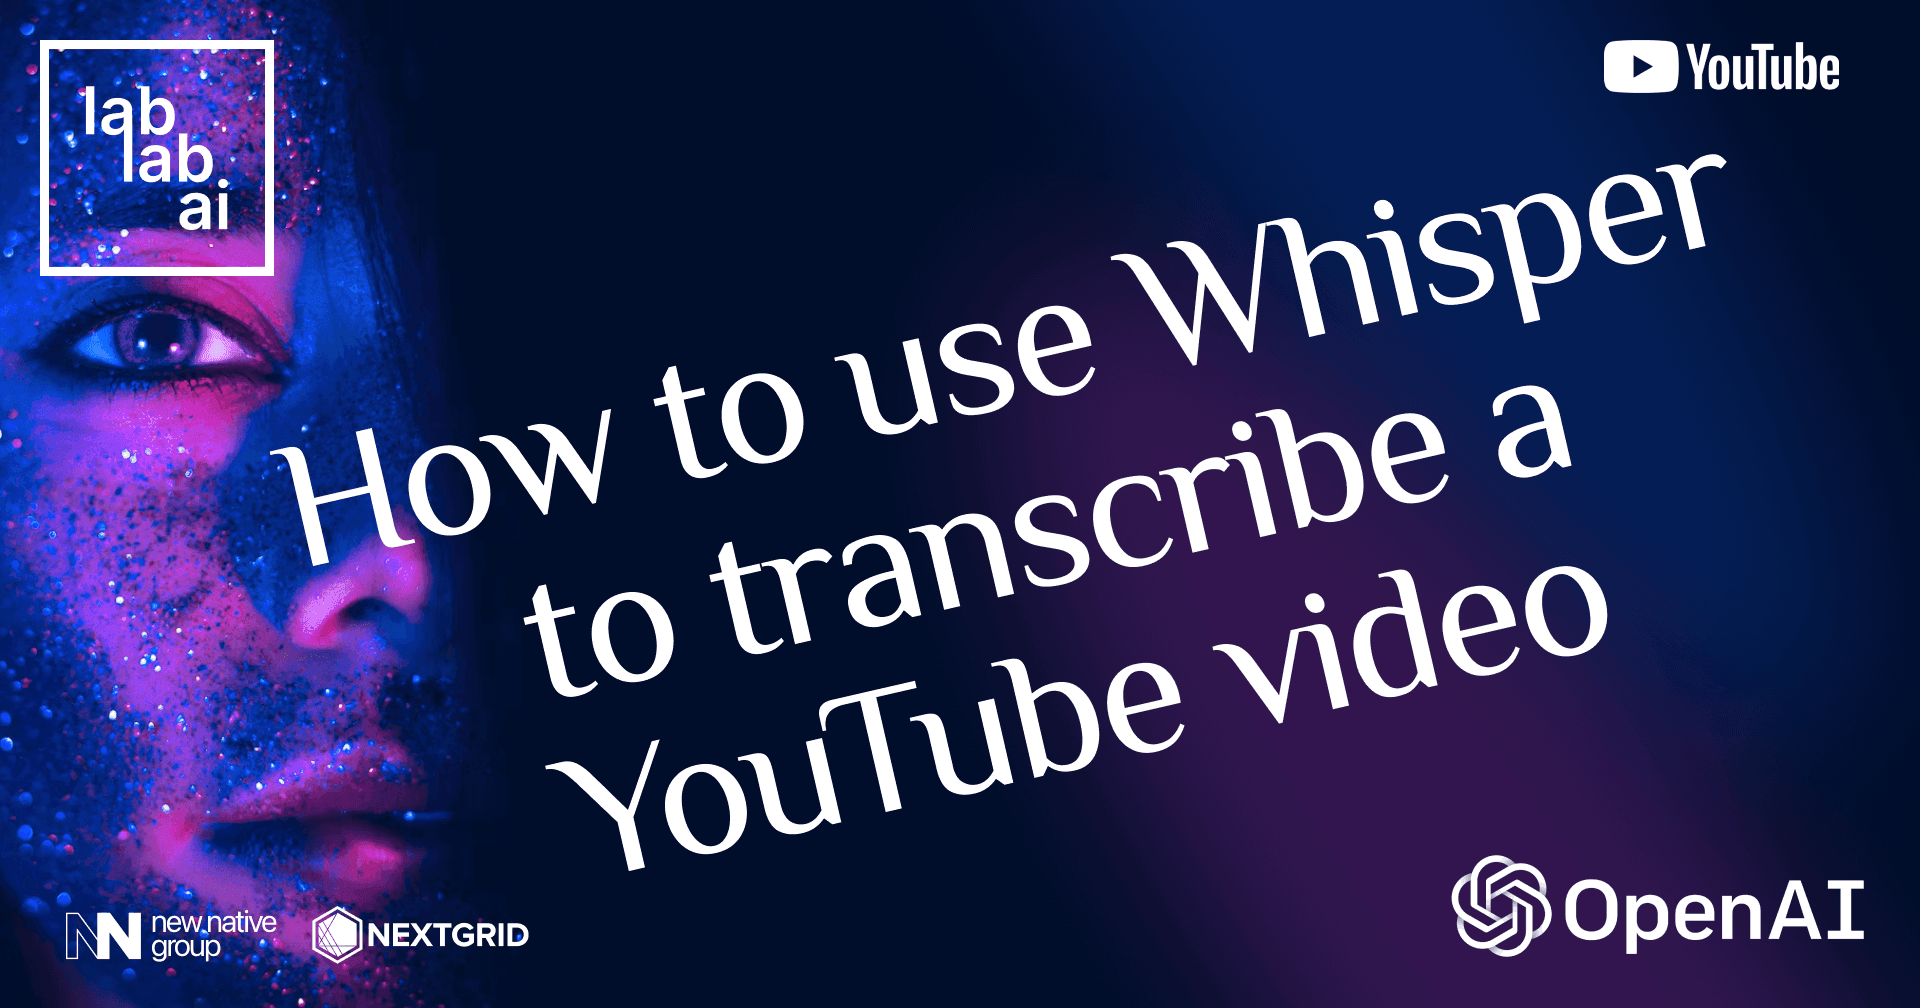 OpenAI Whisper tutorial: How to use Whisper to transcribe a YouTube video